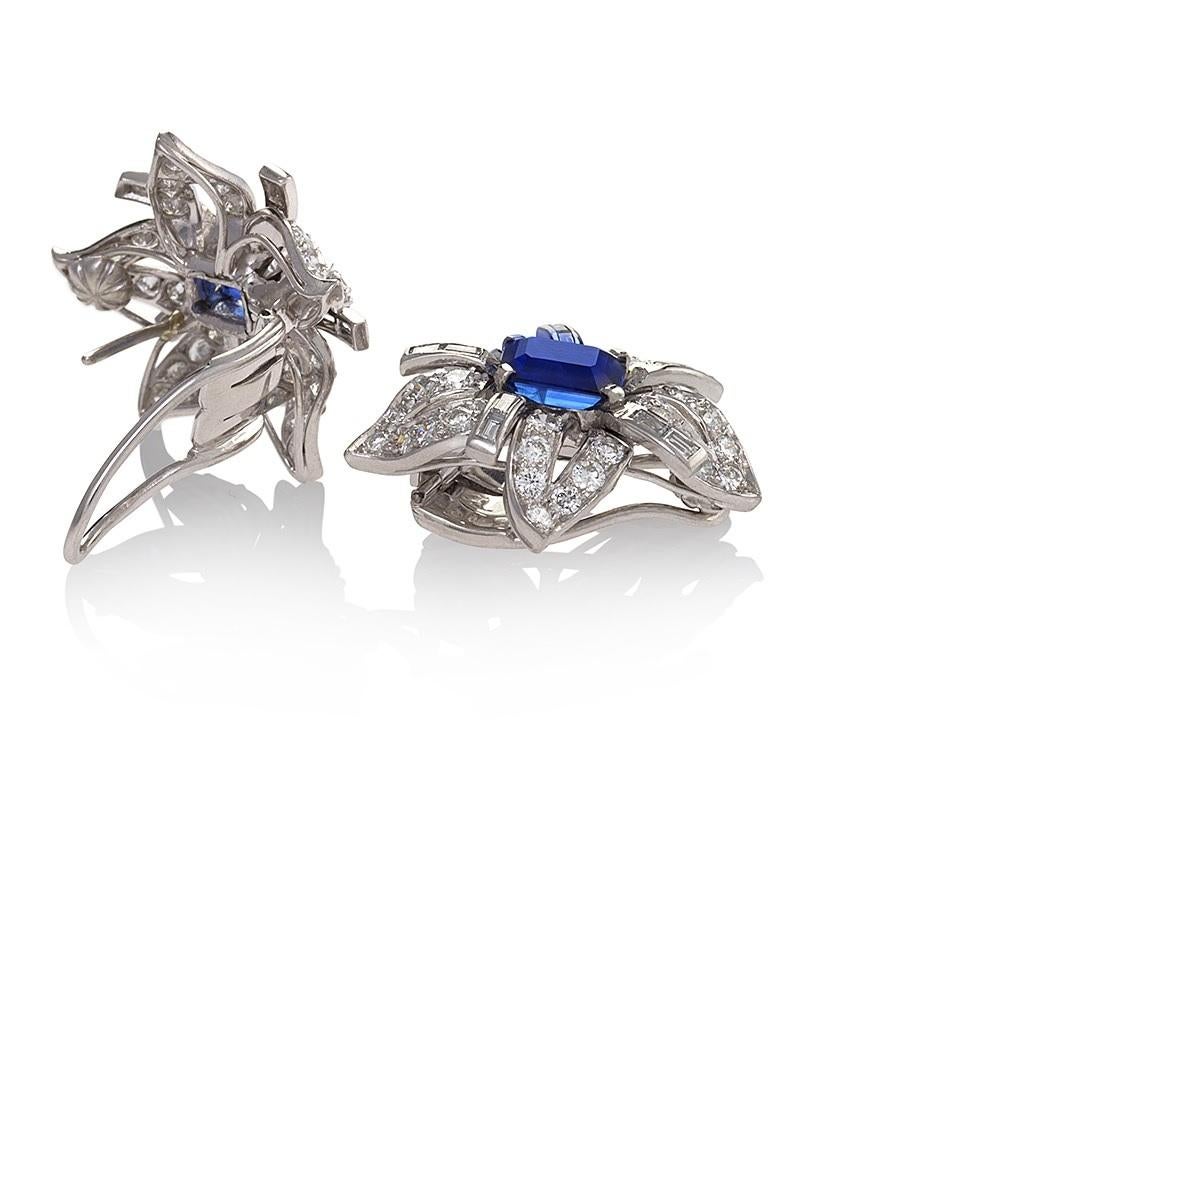 A pair of Mid-20th century platinum, sapphire and diamond flower earrings. The floral form earrings are set with 2 rectangular-cut natural untreated sapphires with an approximate total weight of 4.40 carats, framed by petals further enhanced by 20